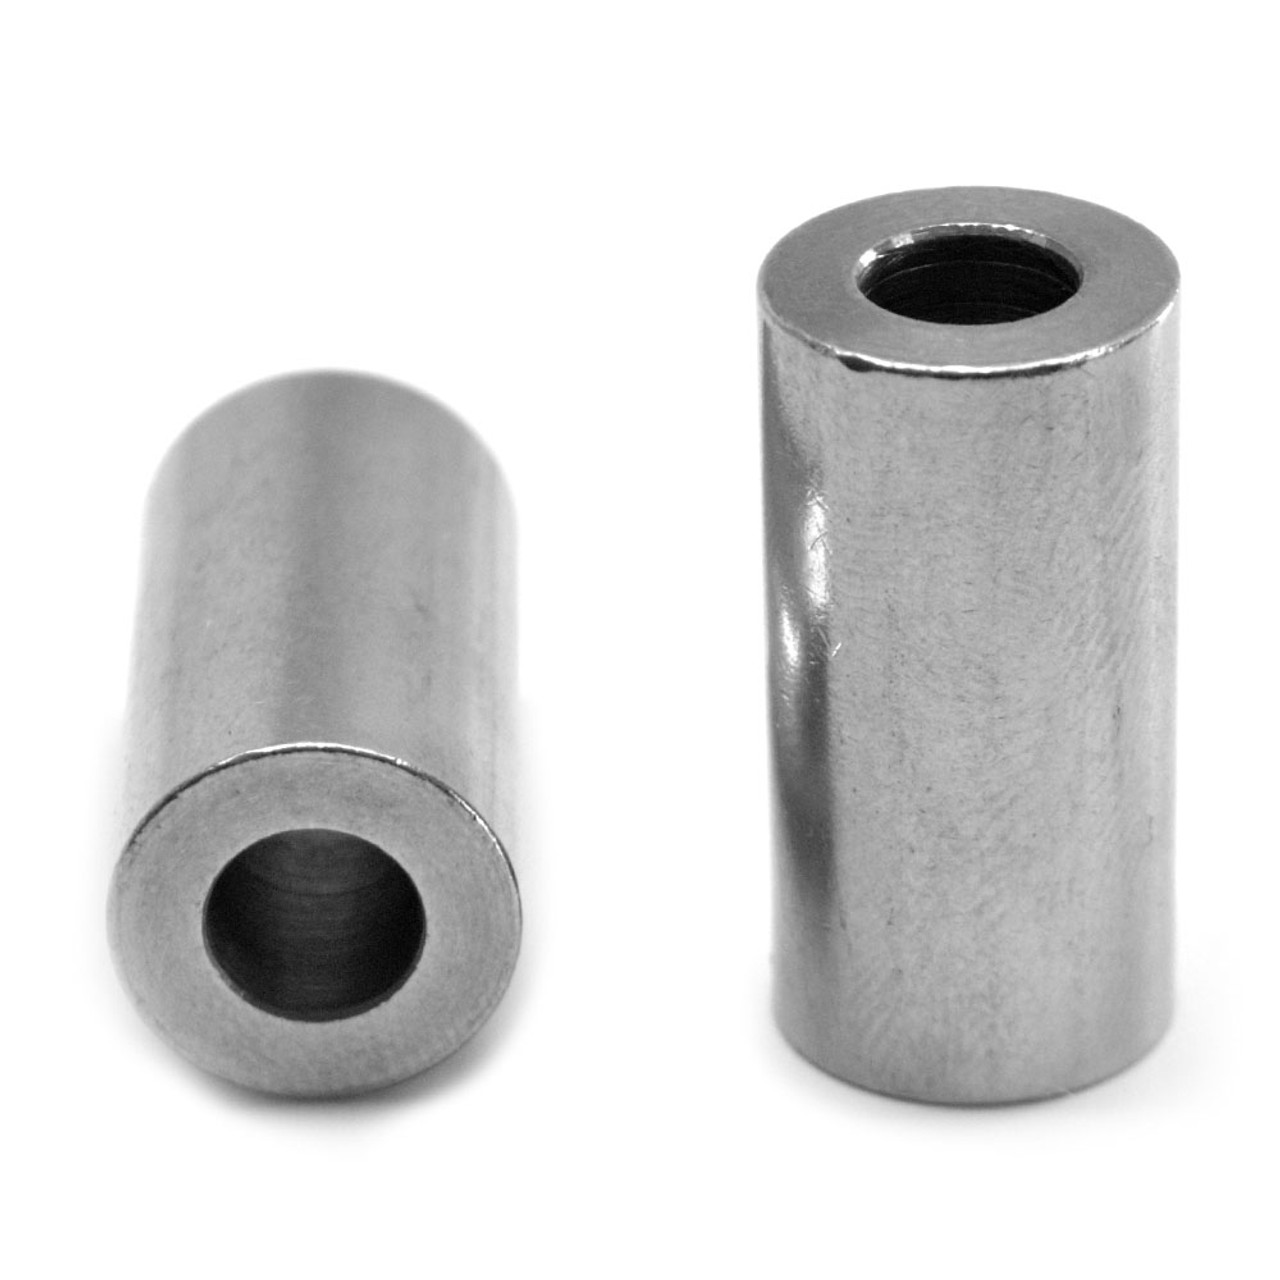 #14 x 1/2" x 1/2" OD Round Spacer Stainless Steel 18-8